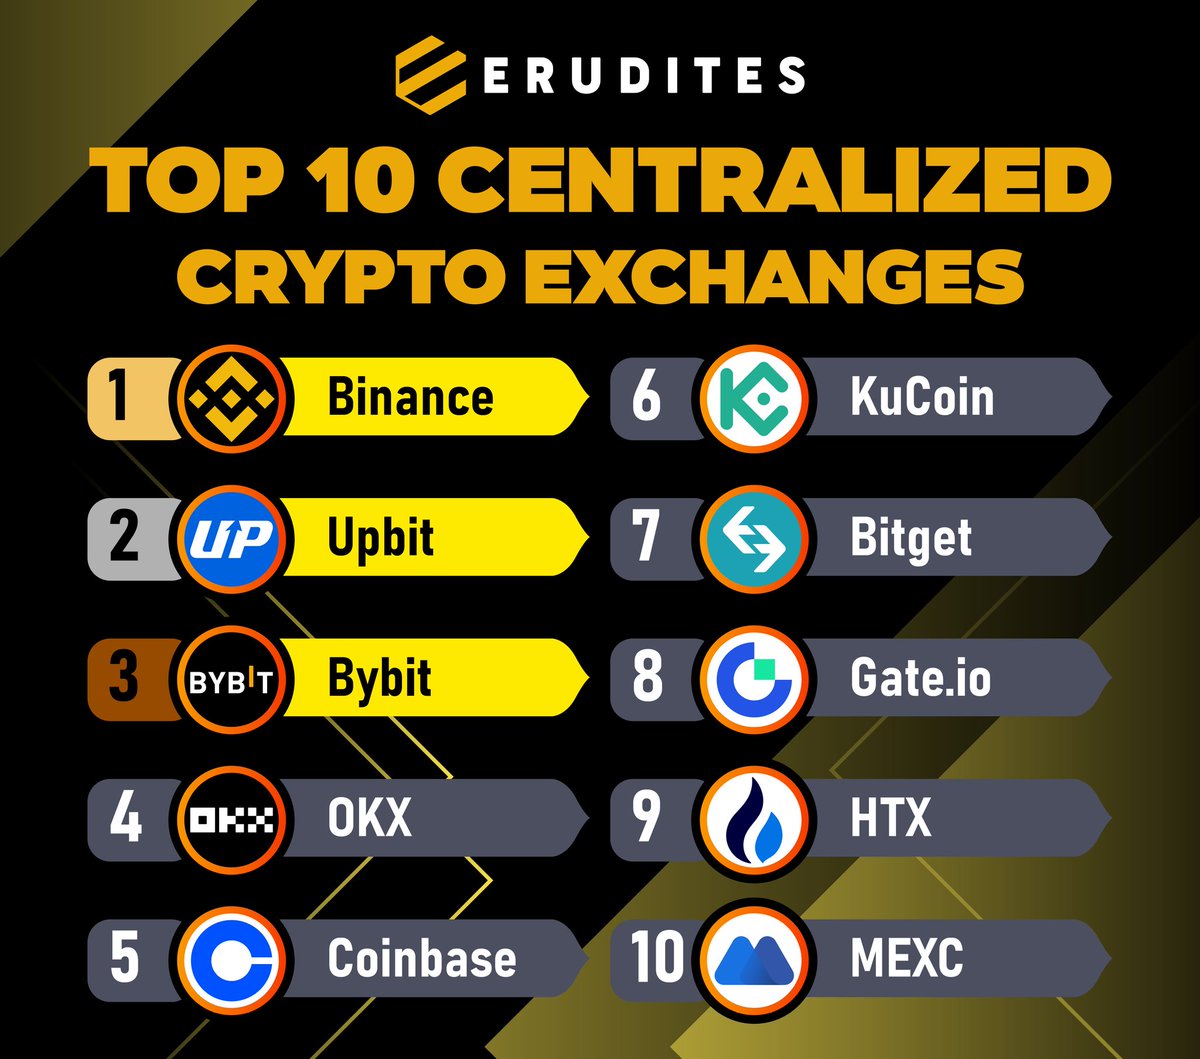 WHAT ARE THE TOP 10 CENTRALIZED CRYPTO EXCHANGES?

#Binance    #Upbit 
#Bybit #OKX    
#Coinbase #KuCoin 
#Bitget    #Gateio 
#HTX #MEXC

#Binance remained the largest centralized exchange (CEX) with its market share at 49.7% in March 2024.